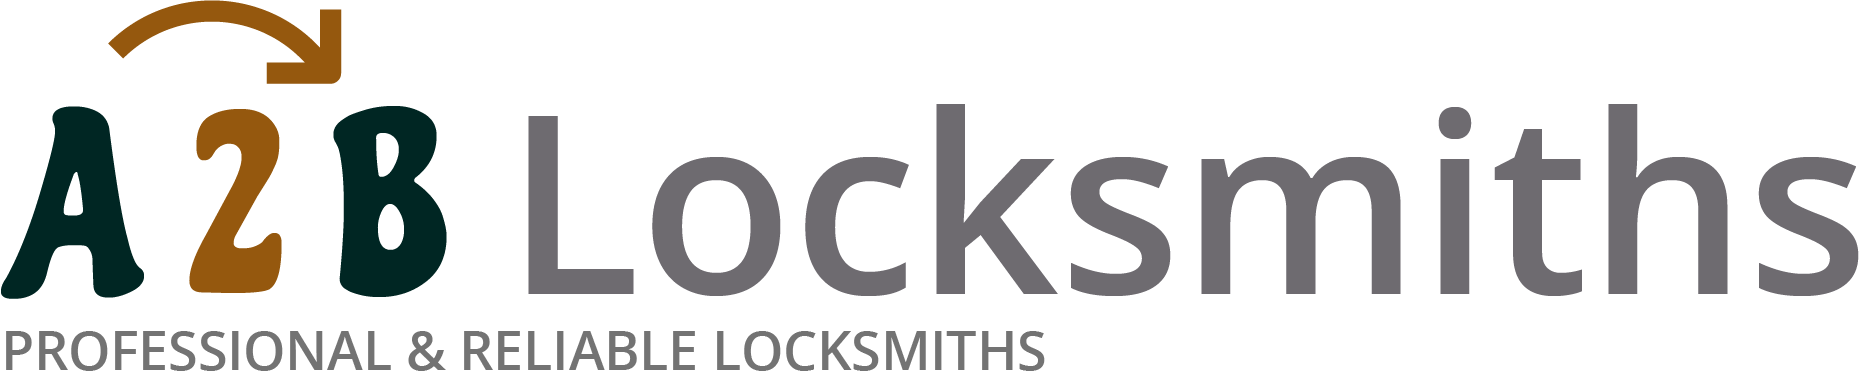 If you are locked out of house in Peckham, our 24/7 local emergency locksmith services can help you.